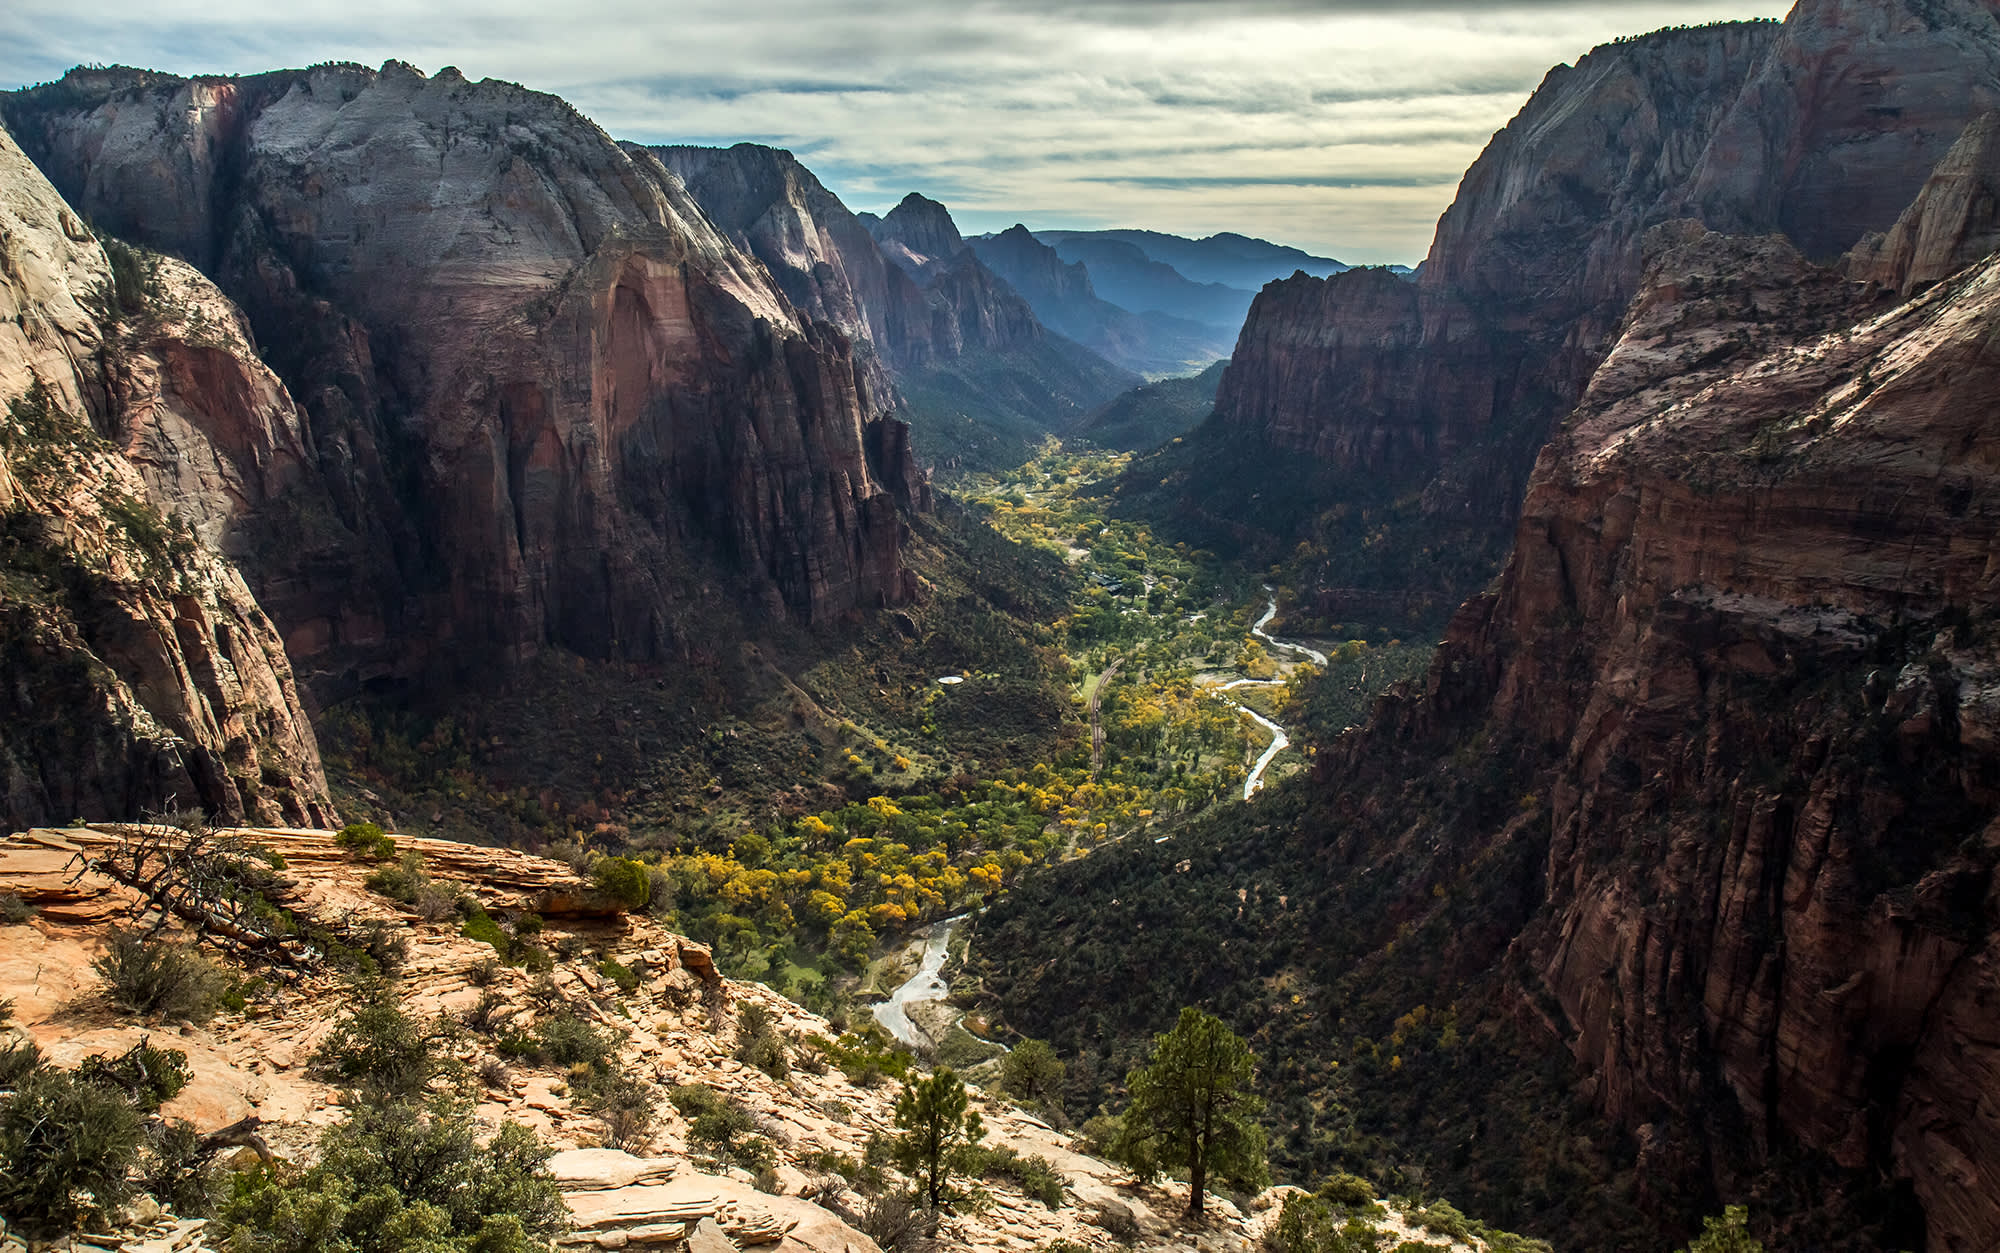 Breathtaking but Deadly: How to Safely Hike Angels Landing